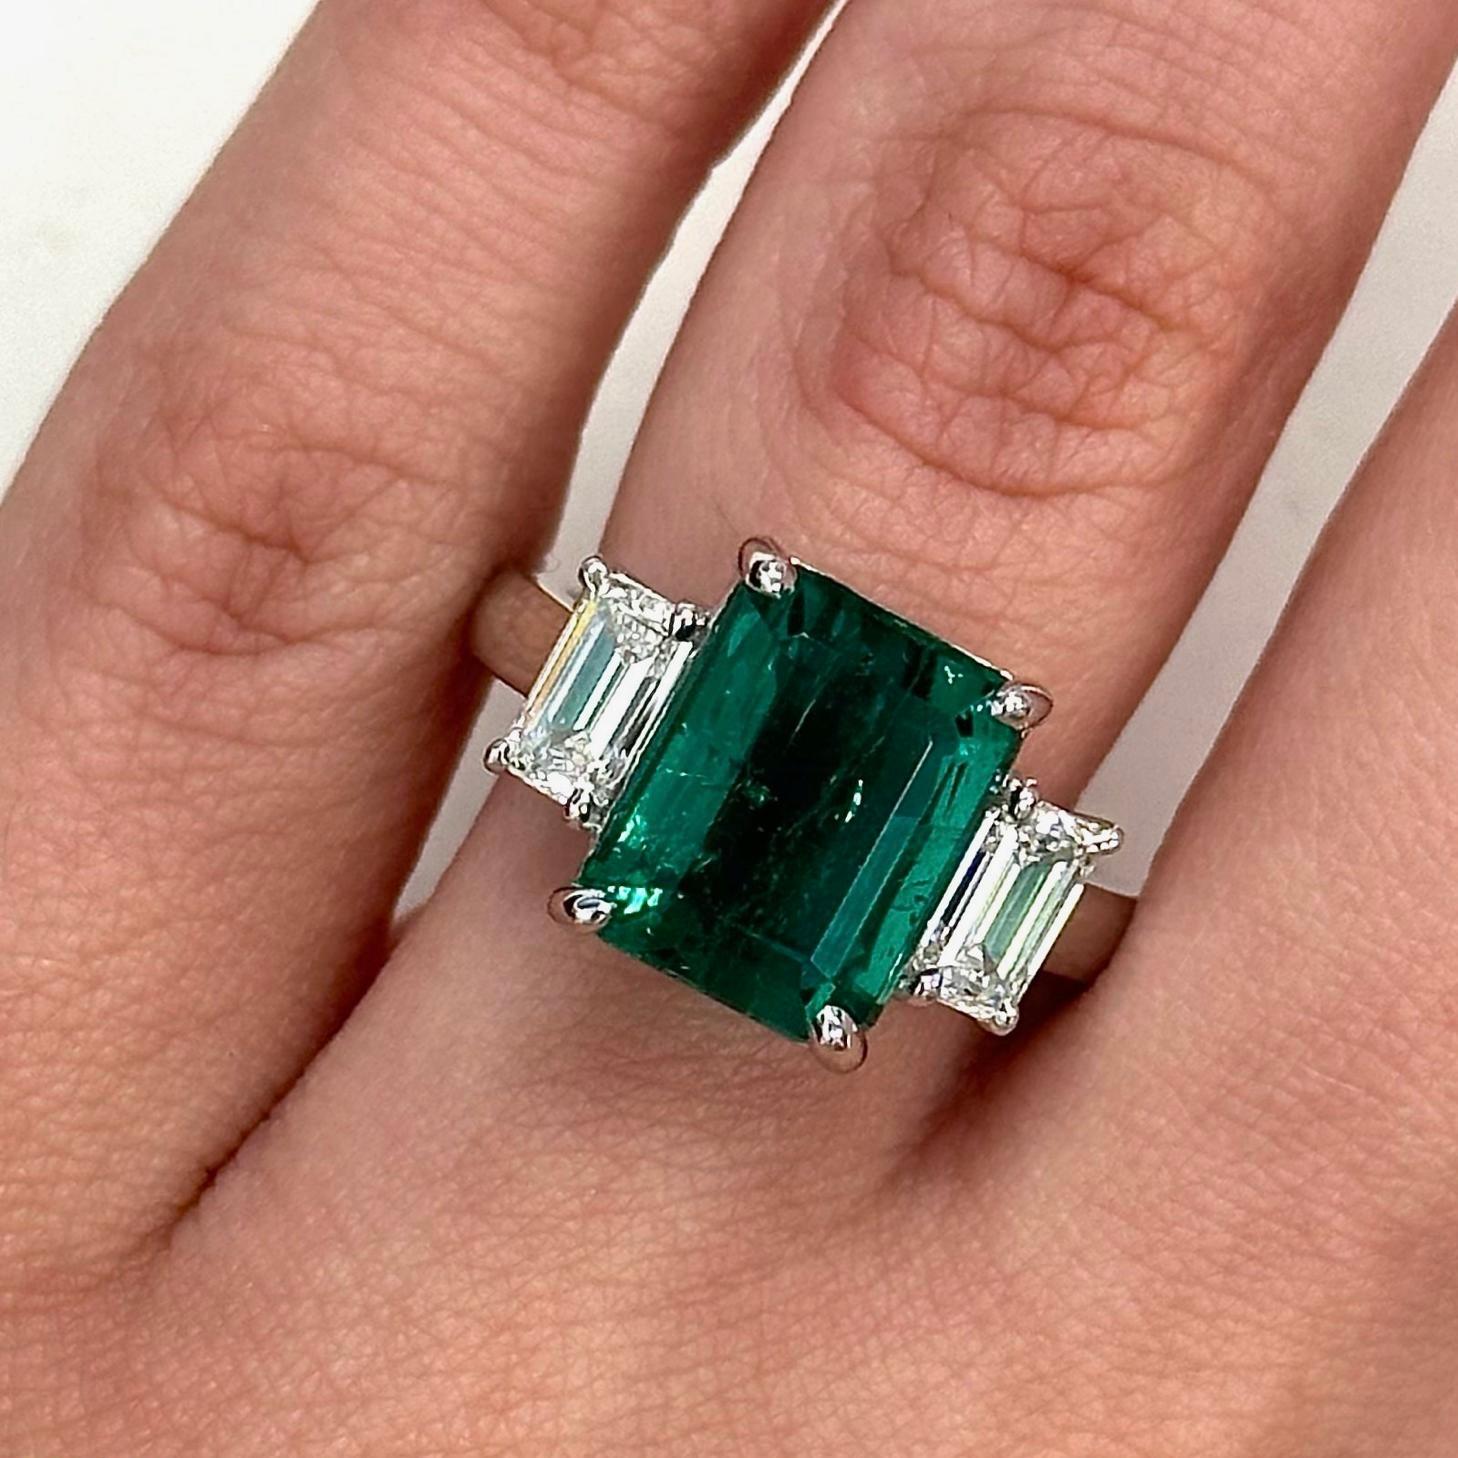 Impressive GIA certified emerald with GIA certified emerald cut diamonds three-stone ring. High jewelry by Alexander Beverly Hills.
5.74 carats total gemstone weight. 
GIA certified 4.74 carat emerald, Minor (F1). Complemented with 2 GIA certified